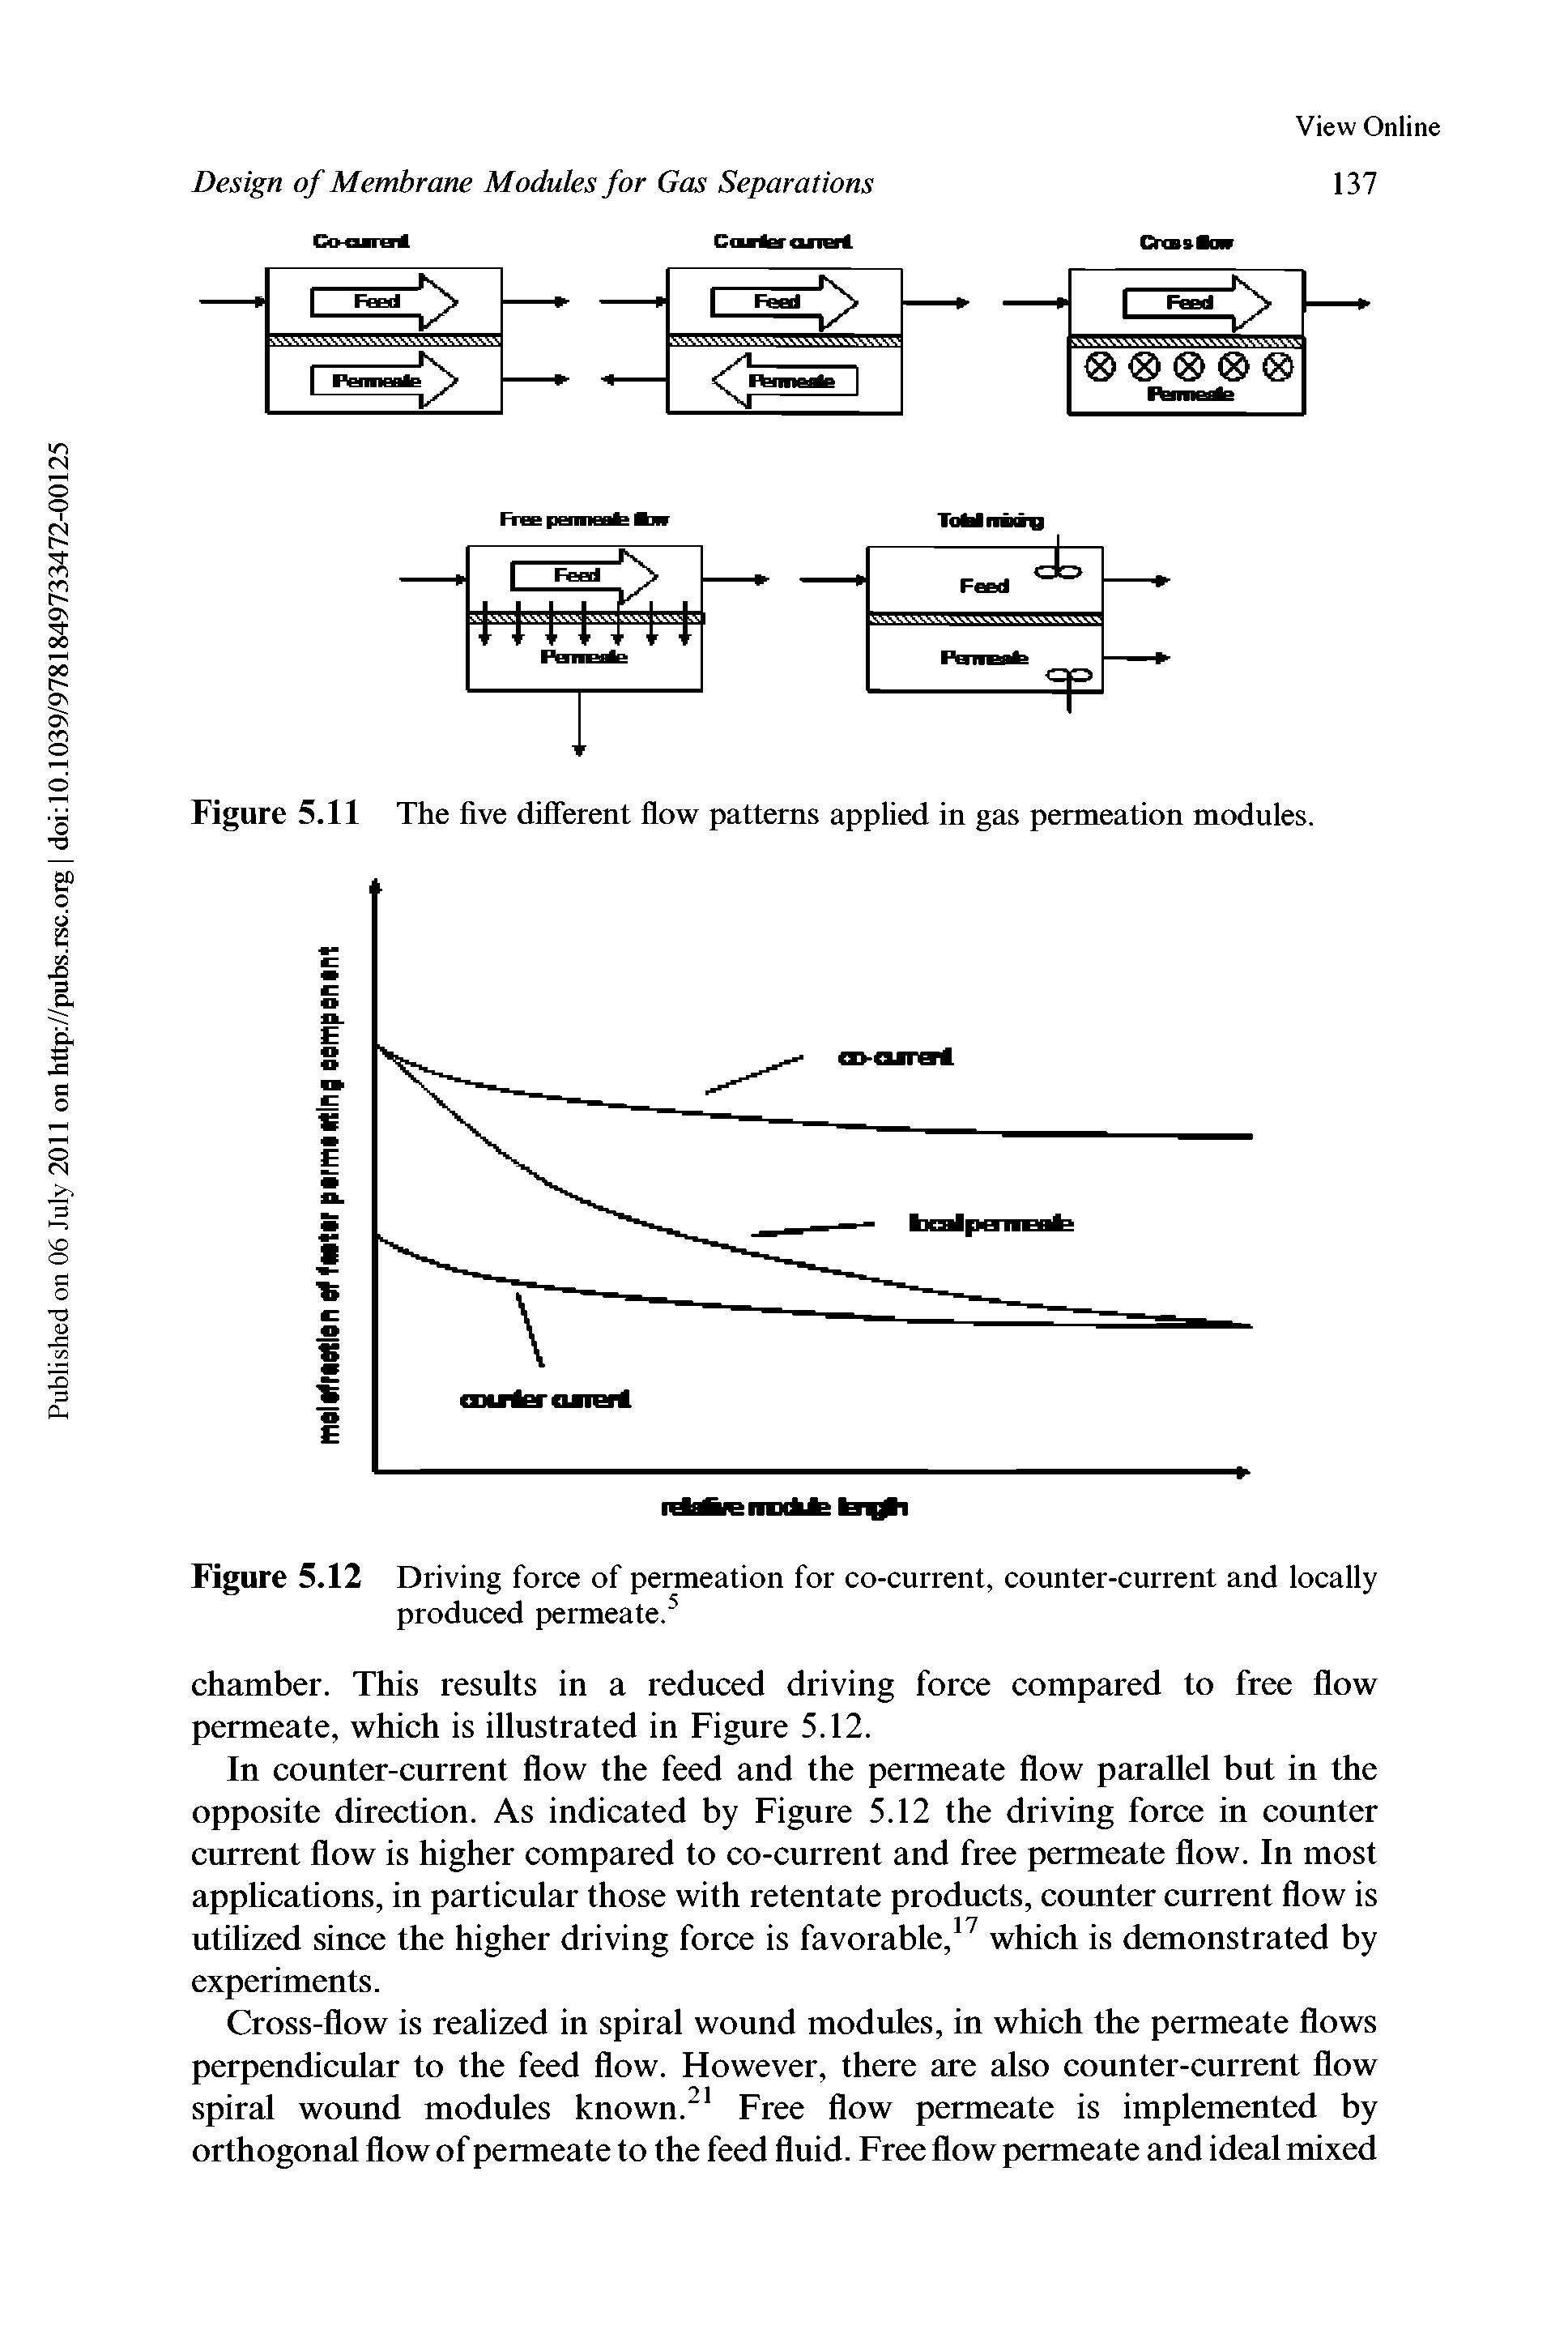 Figure 5.11 The five different flow patterns applied in gas permeation modules.